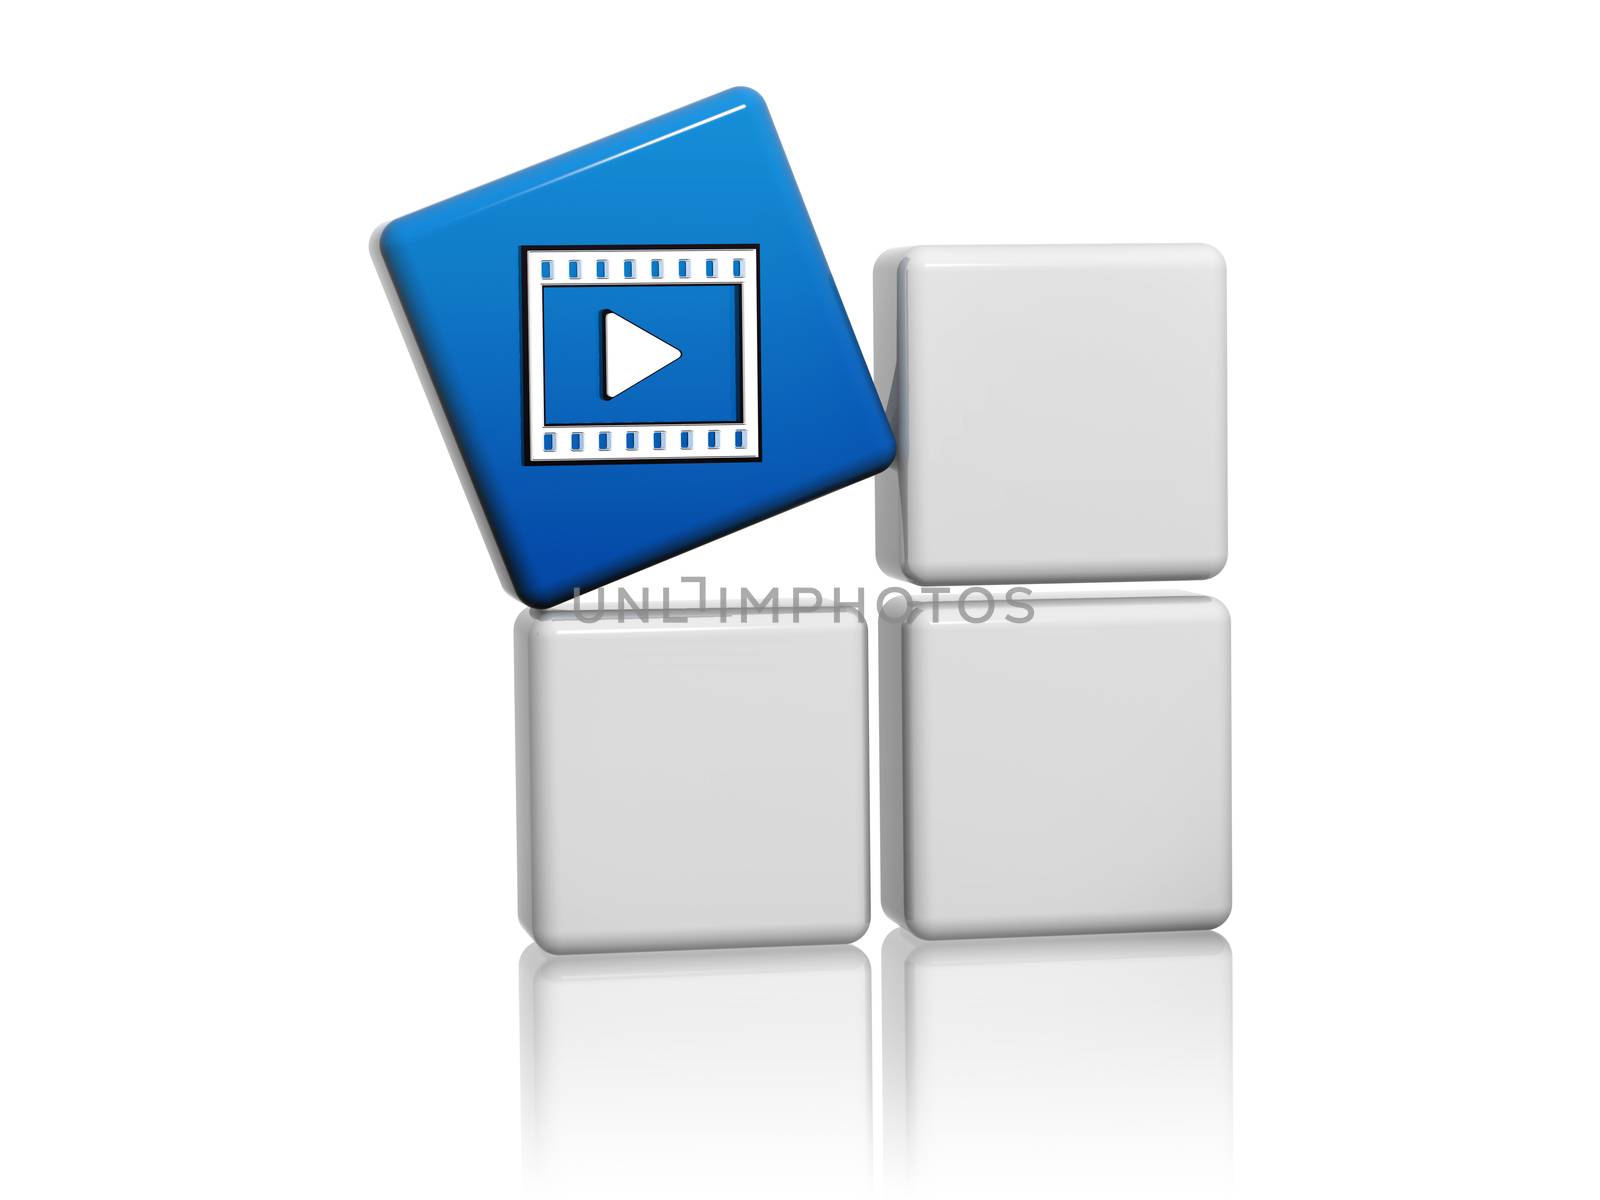 video player sign in blue cube on boxes 3D illustration by marinini